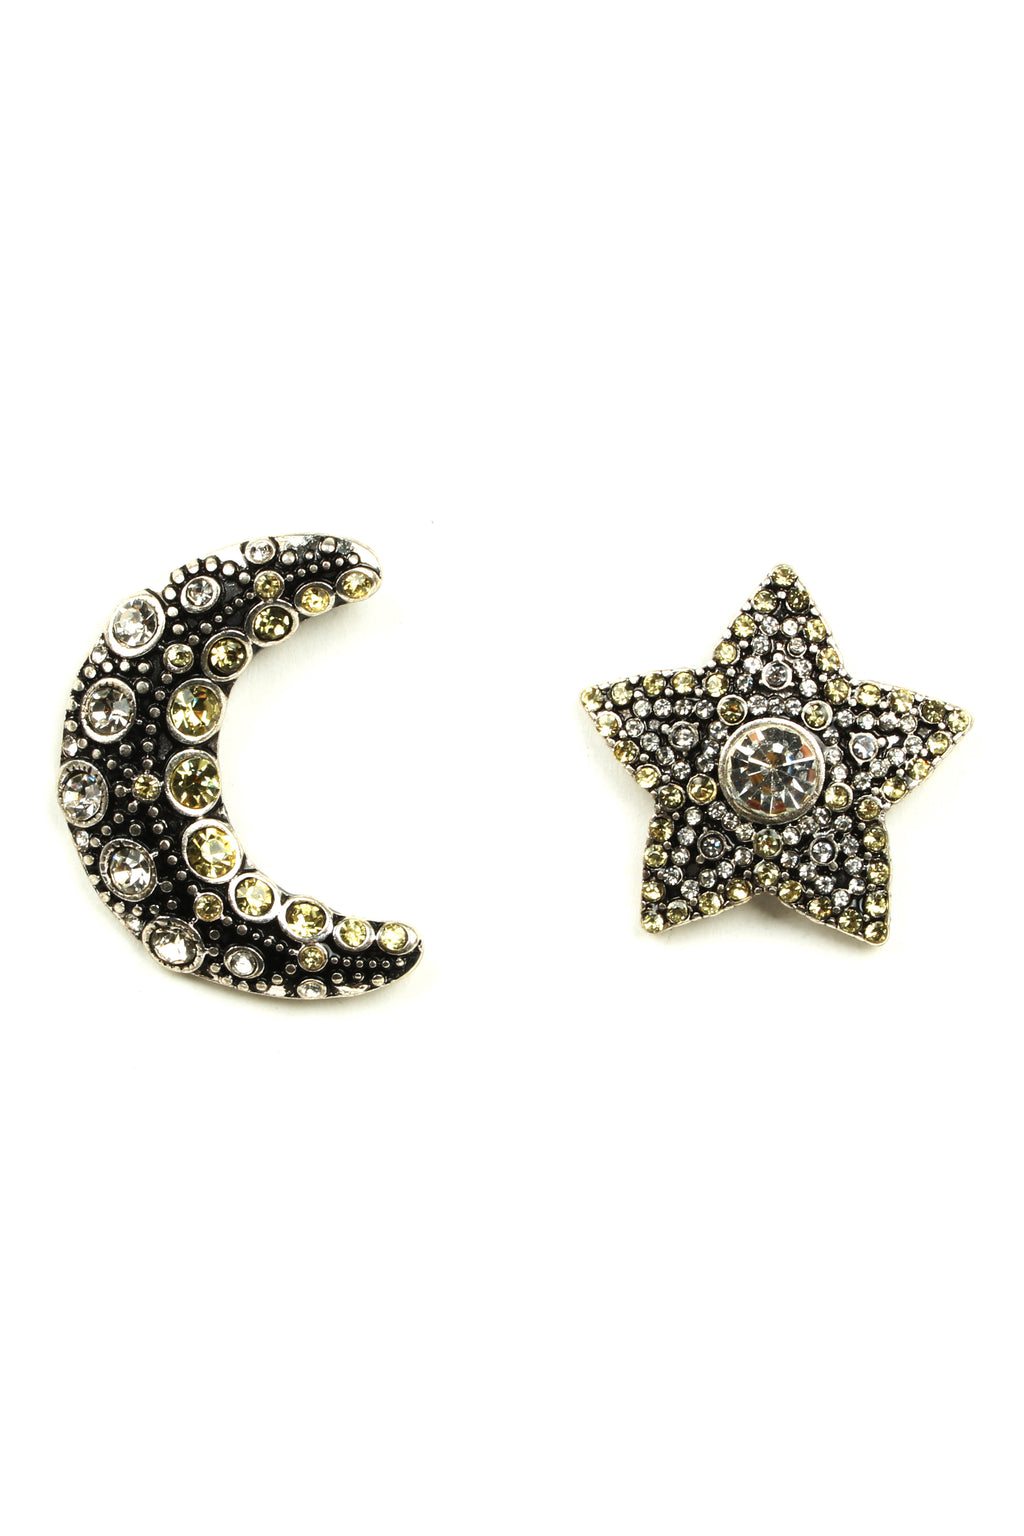 Metallic silver star & crescent moon stud earrings studded with glass crystals.